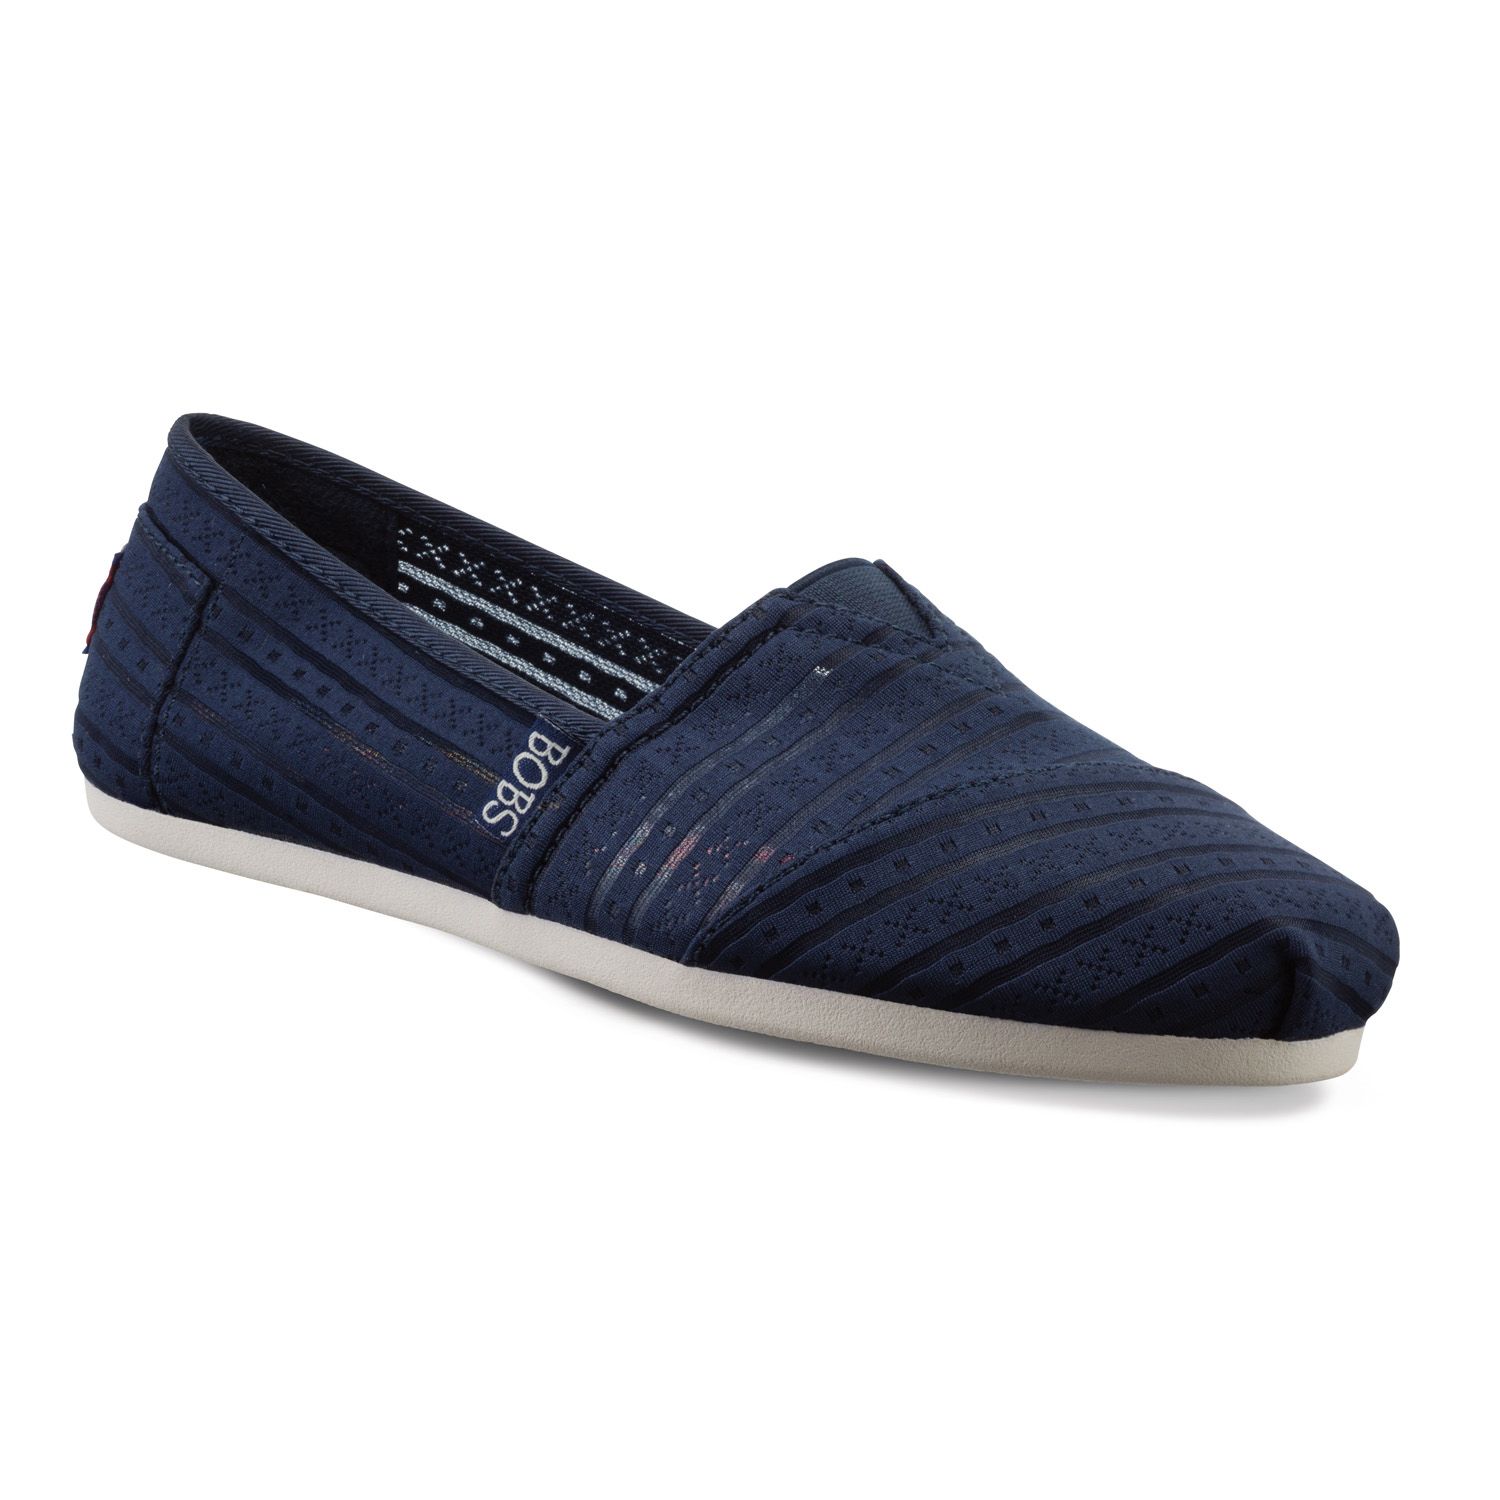 navy blue bobs shoes